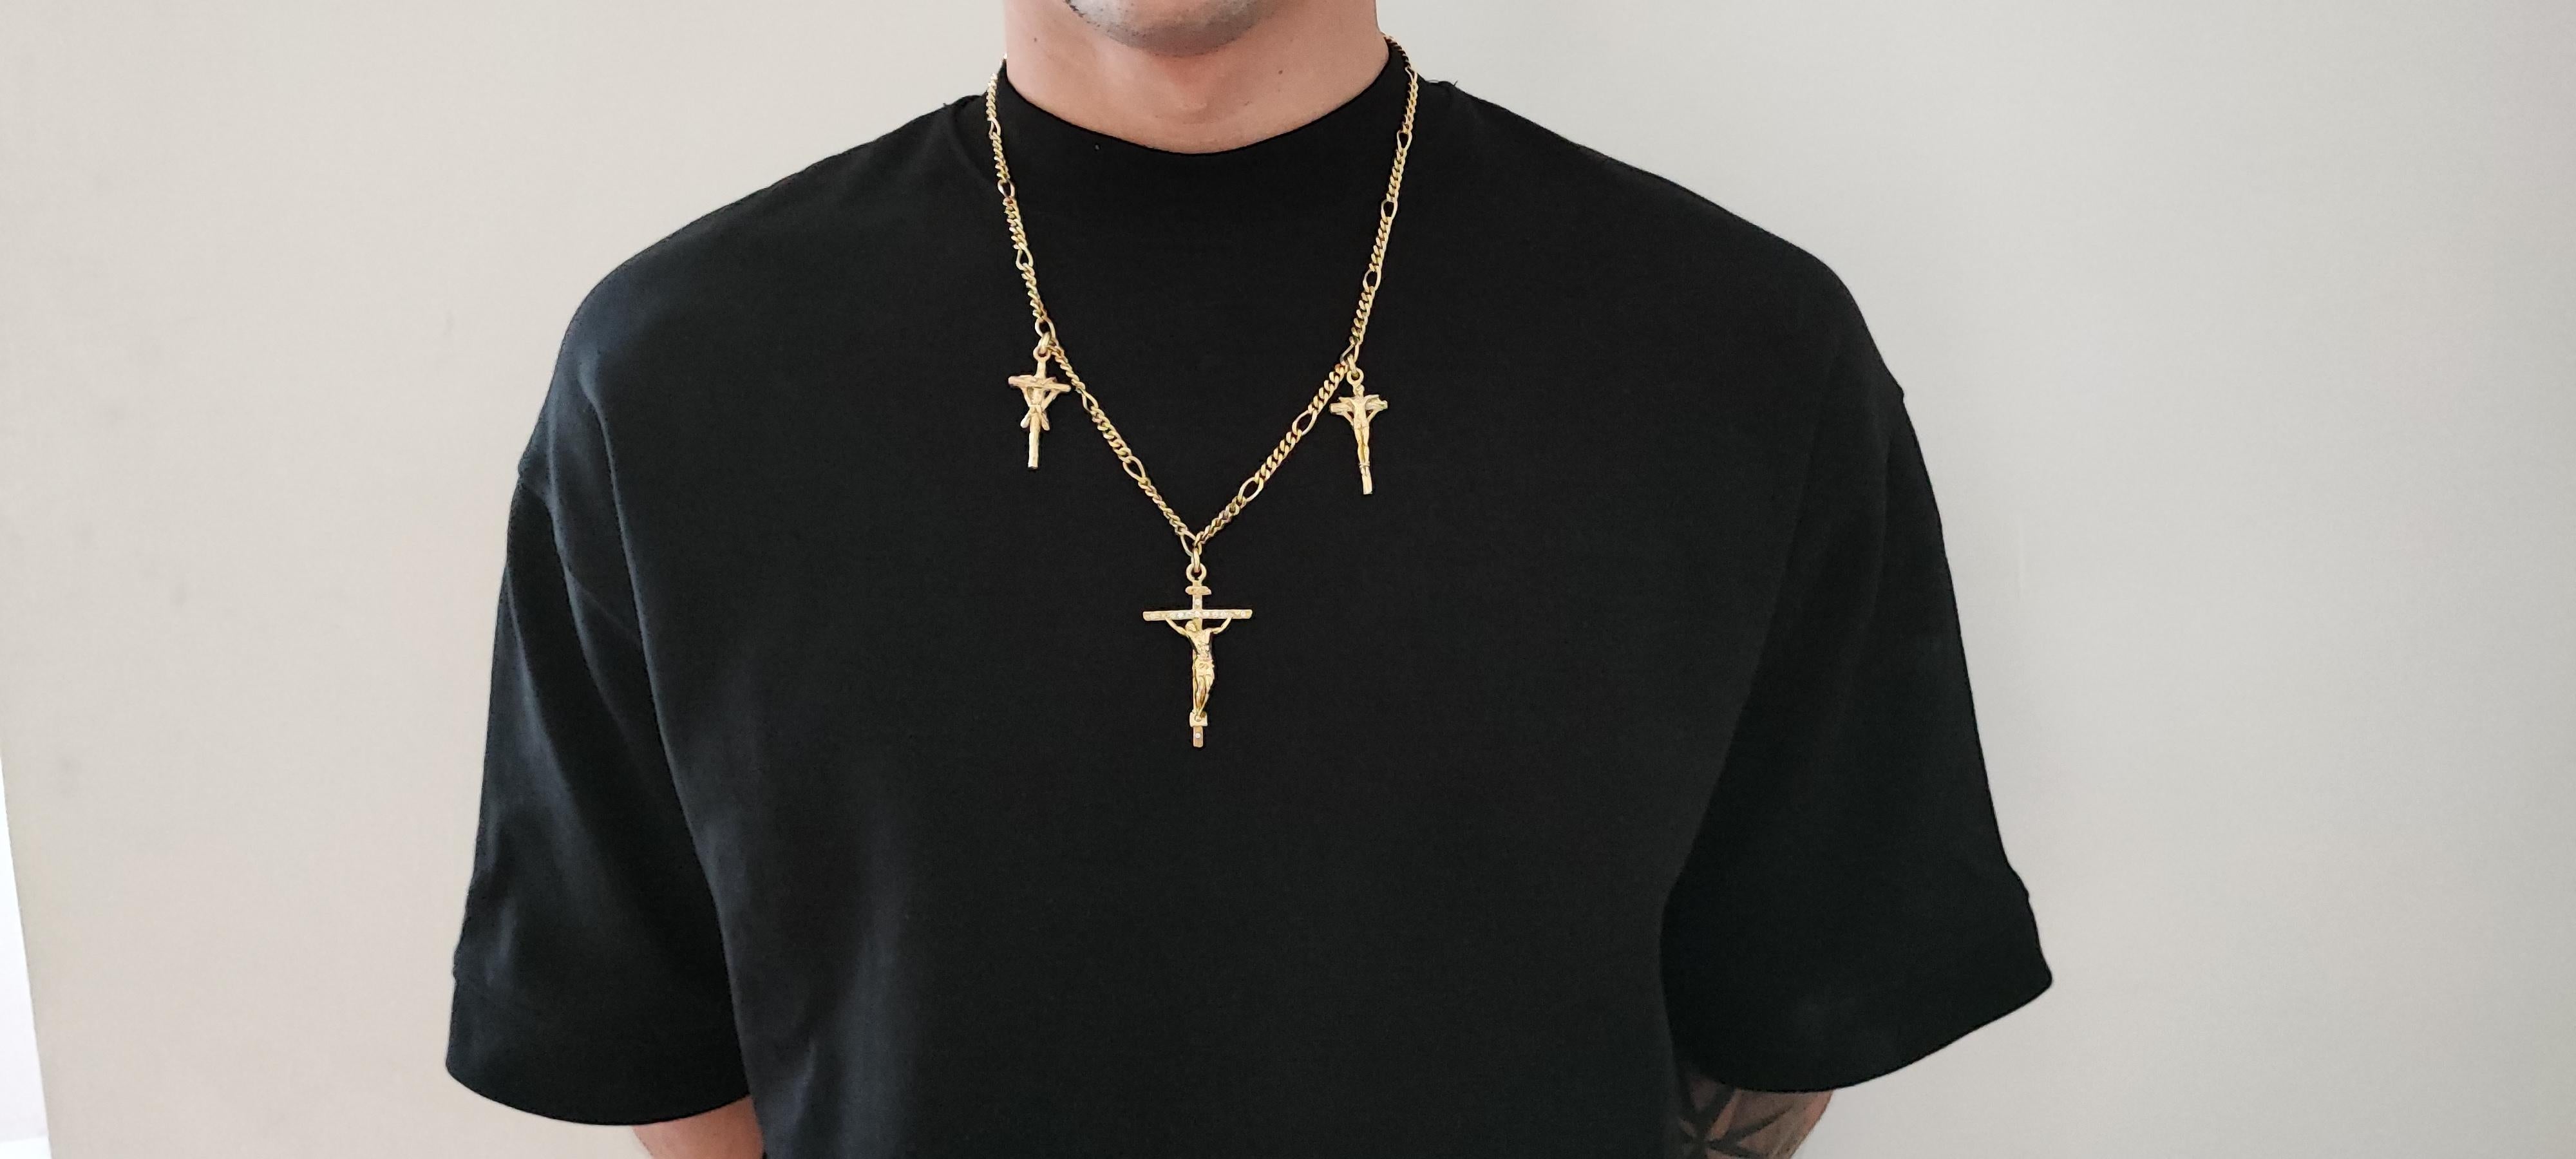 14 Carat Crosses Gold and Diamonds Necklace 